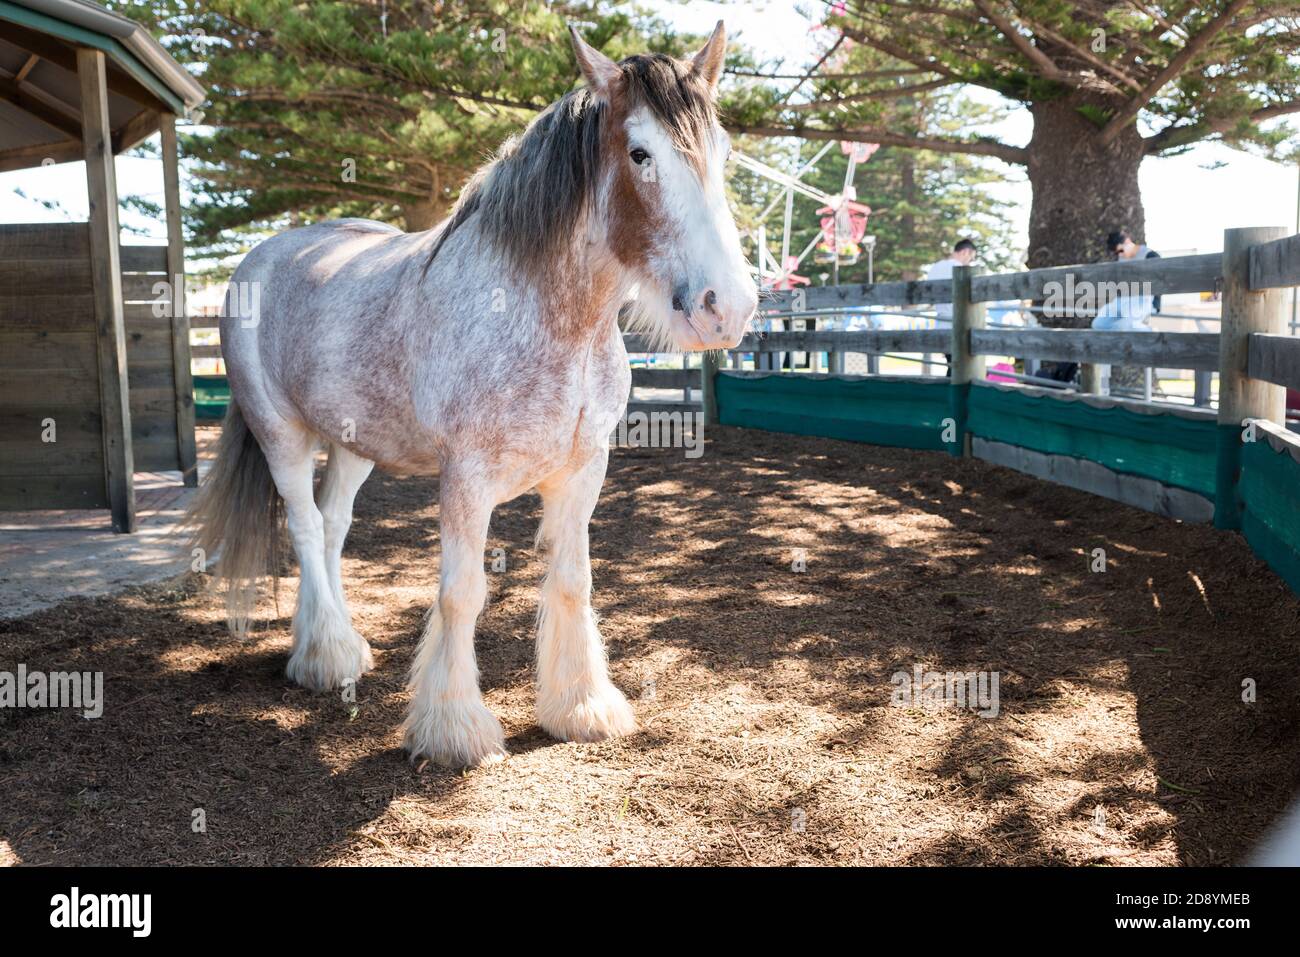 One of the beautiful Clydesdale horses that pulls the horse drawn tram in Victor Harbor, South Australia Stock Photo